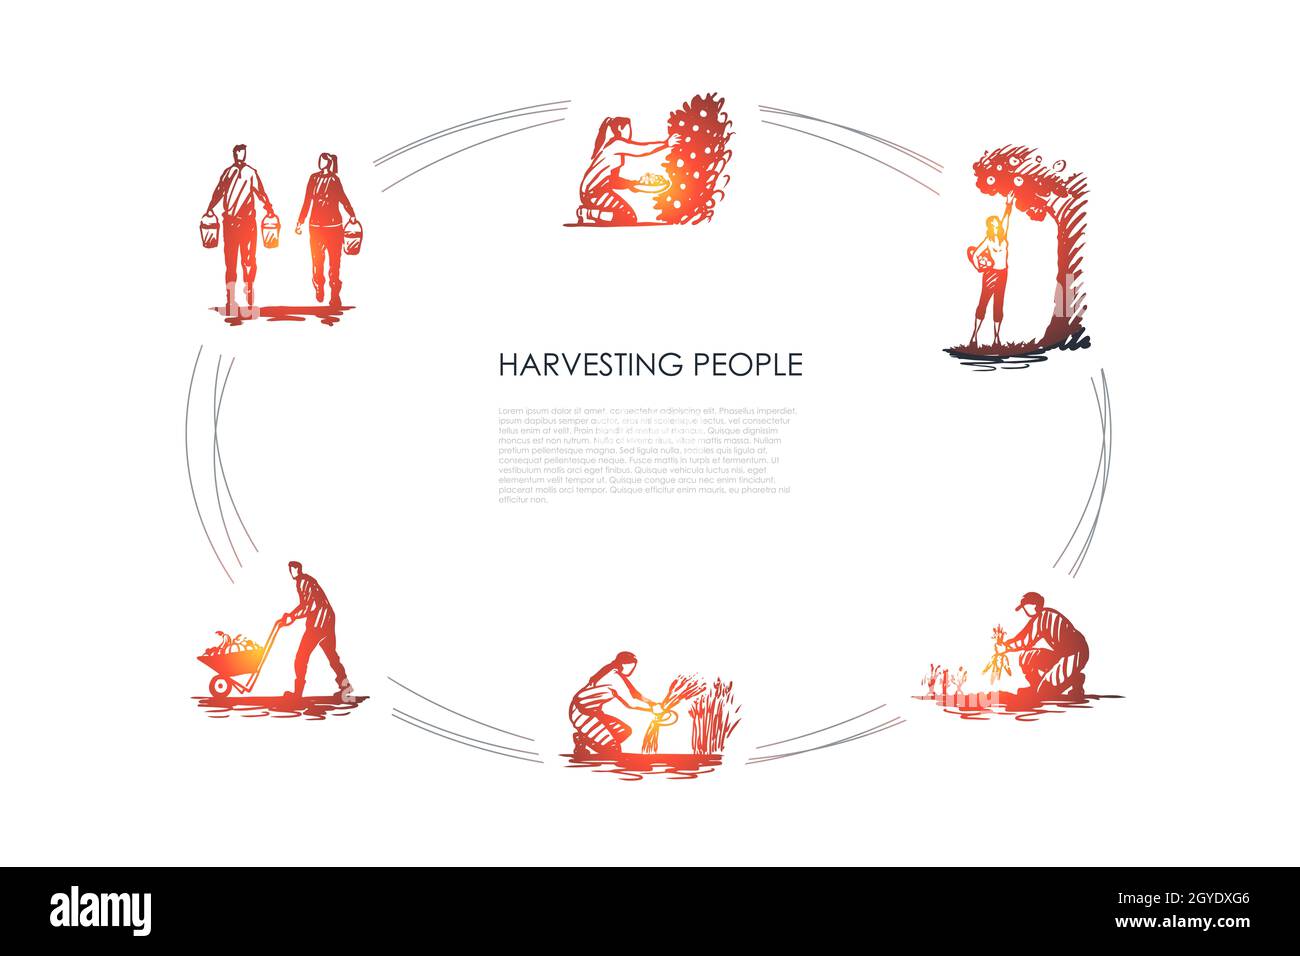 Harvesting people - people picking fruits and carrots, binding grass, carrying and transporting harvest vector concept set. Hand drawn sketch isolated Stock Photo